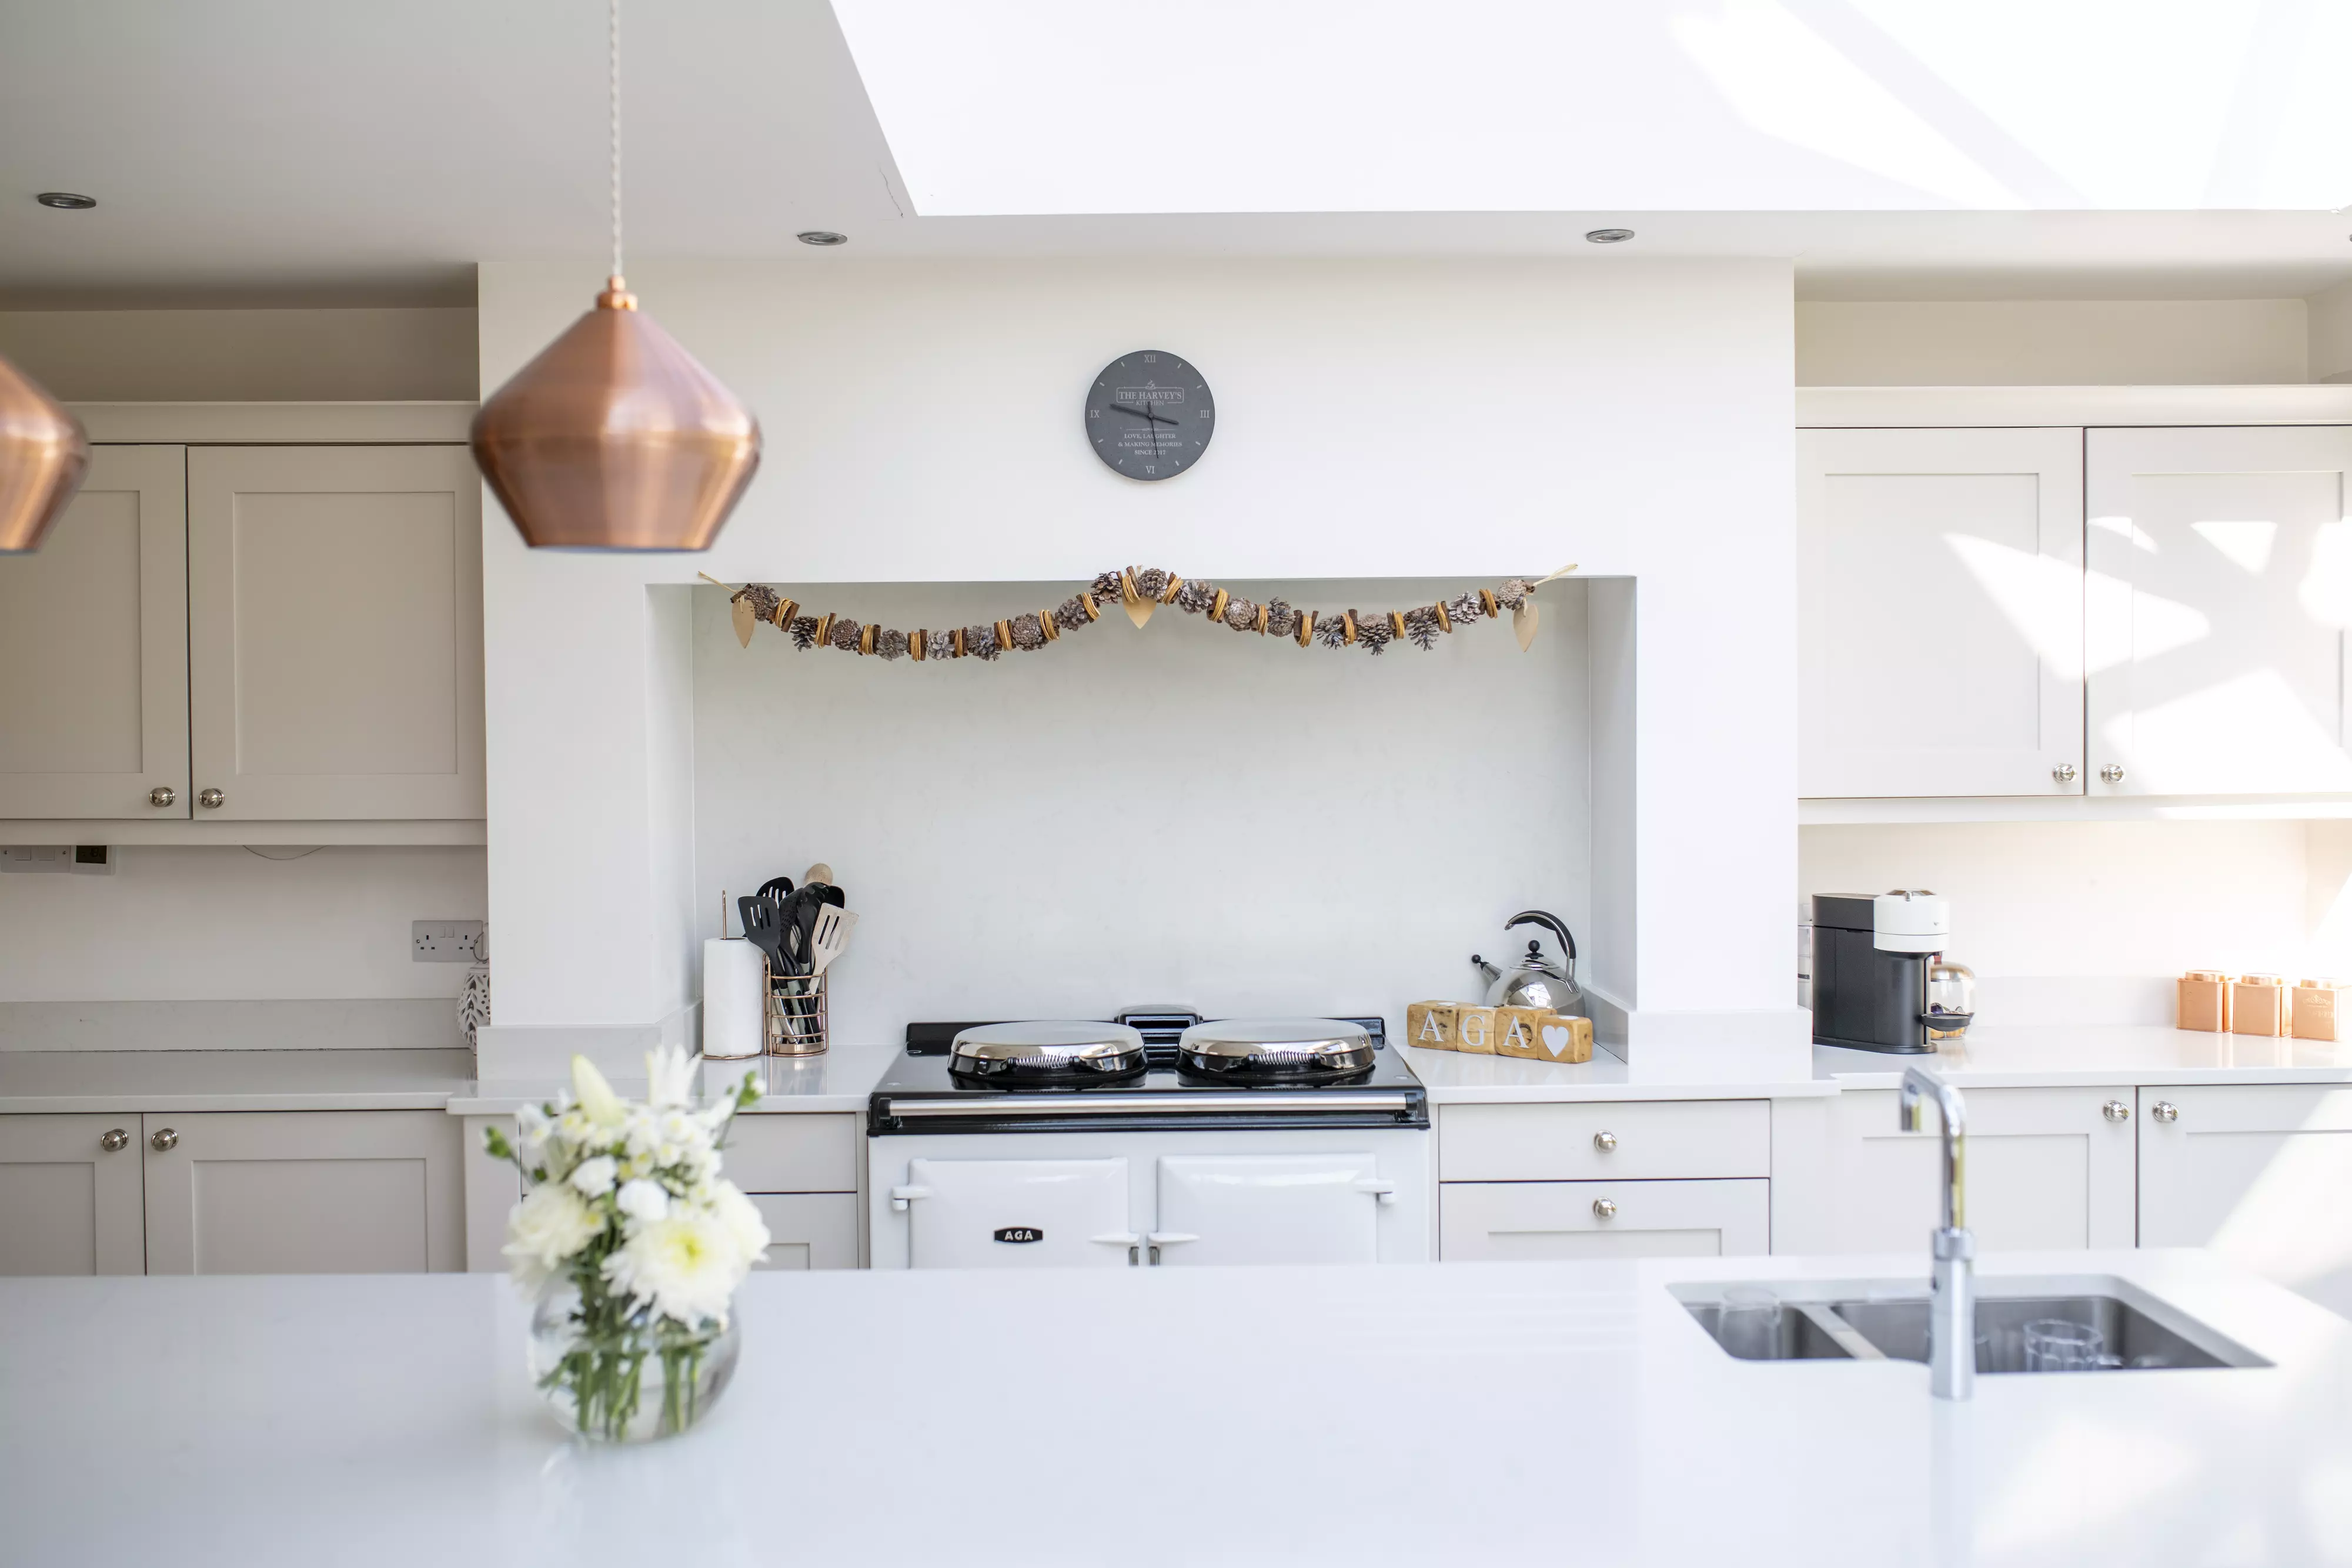 Sleek white modern kitchen with copper lights and AGA cooker.